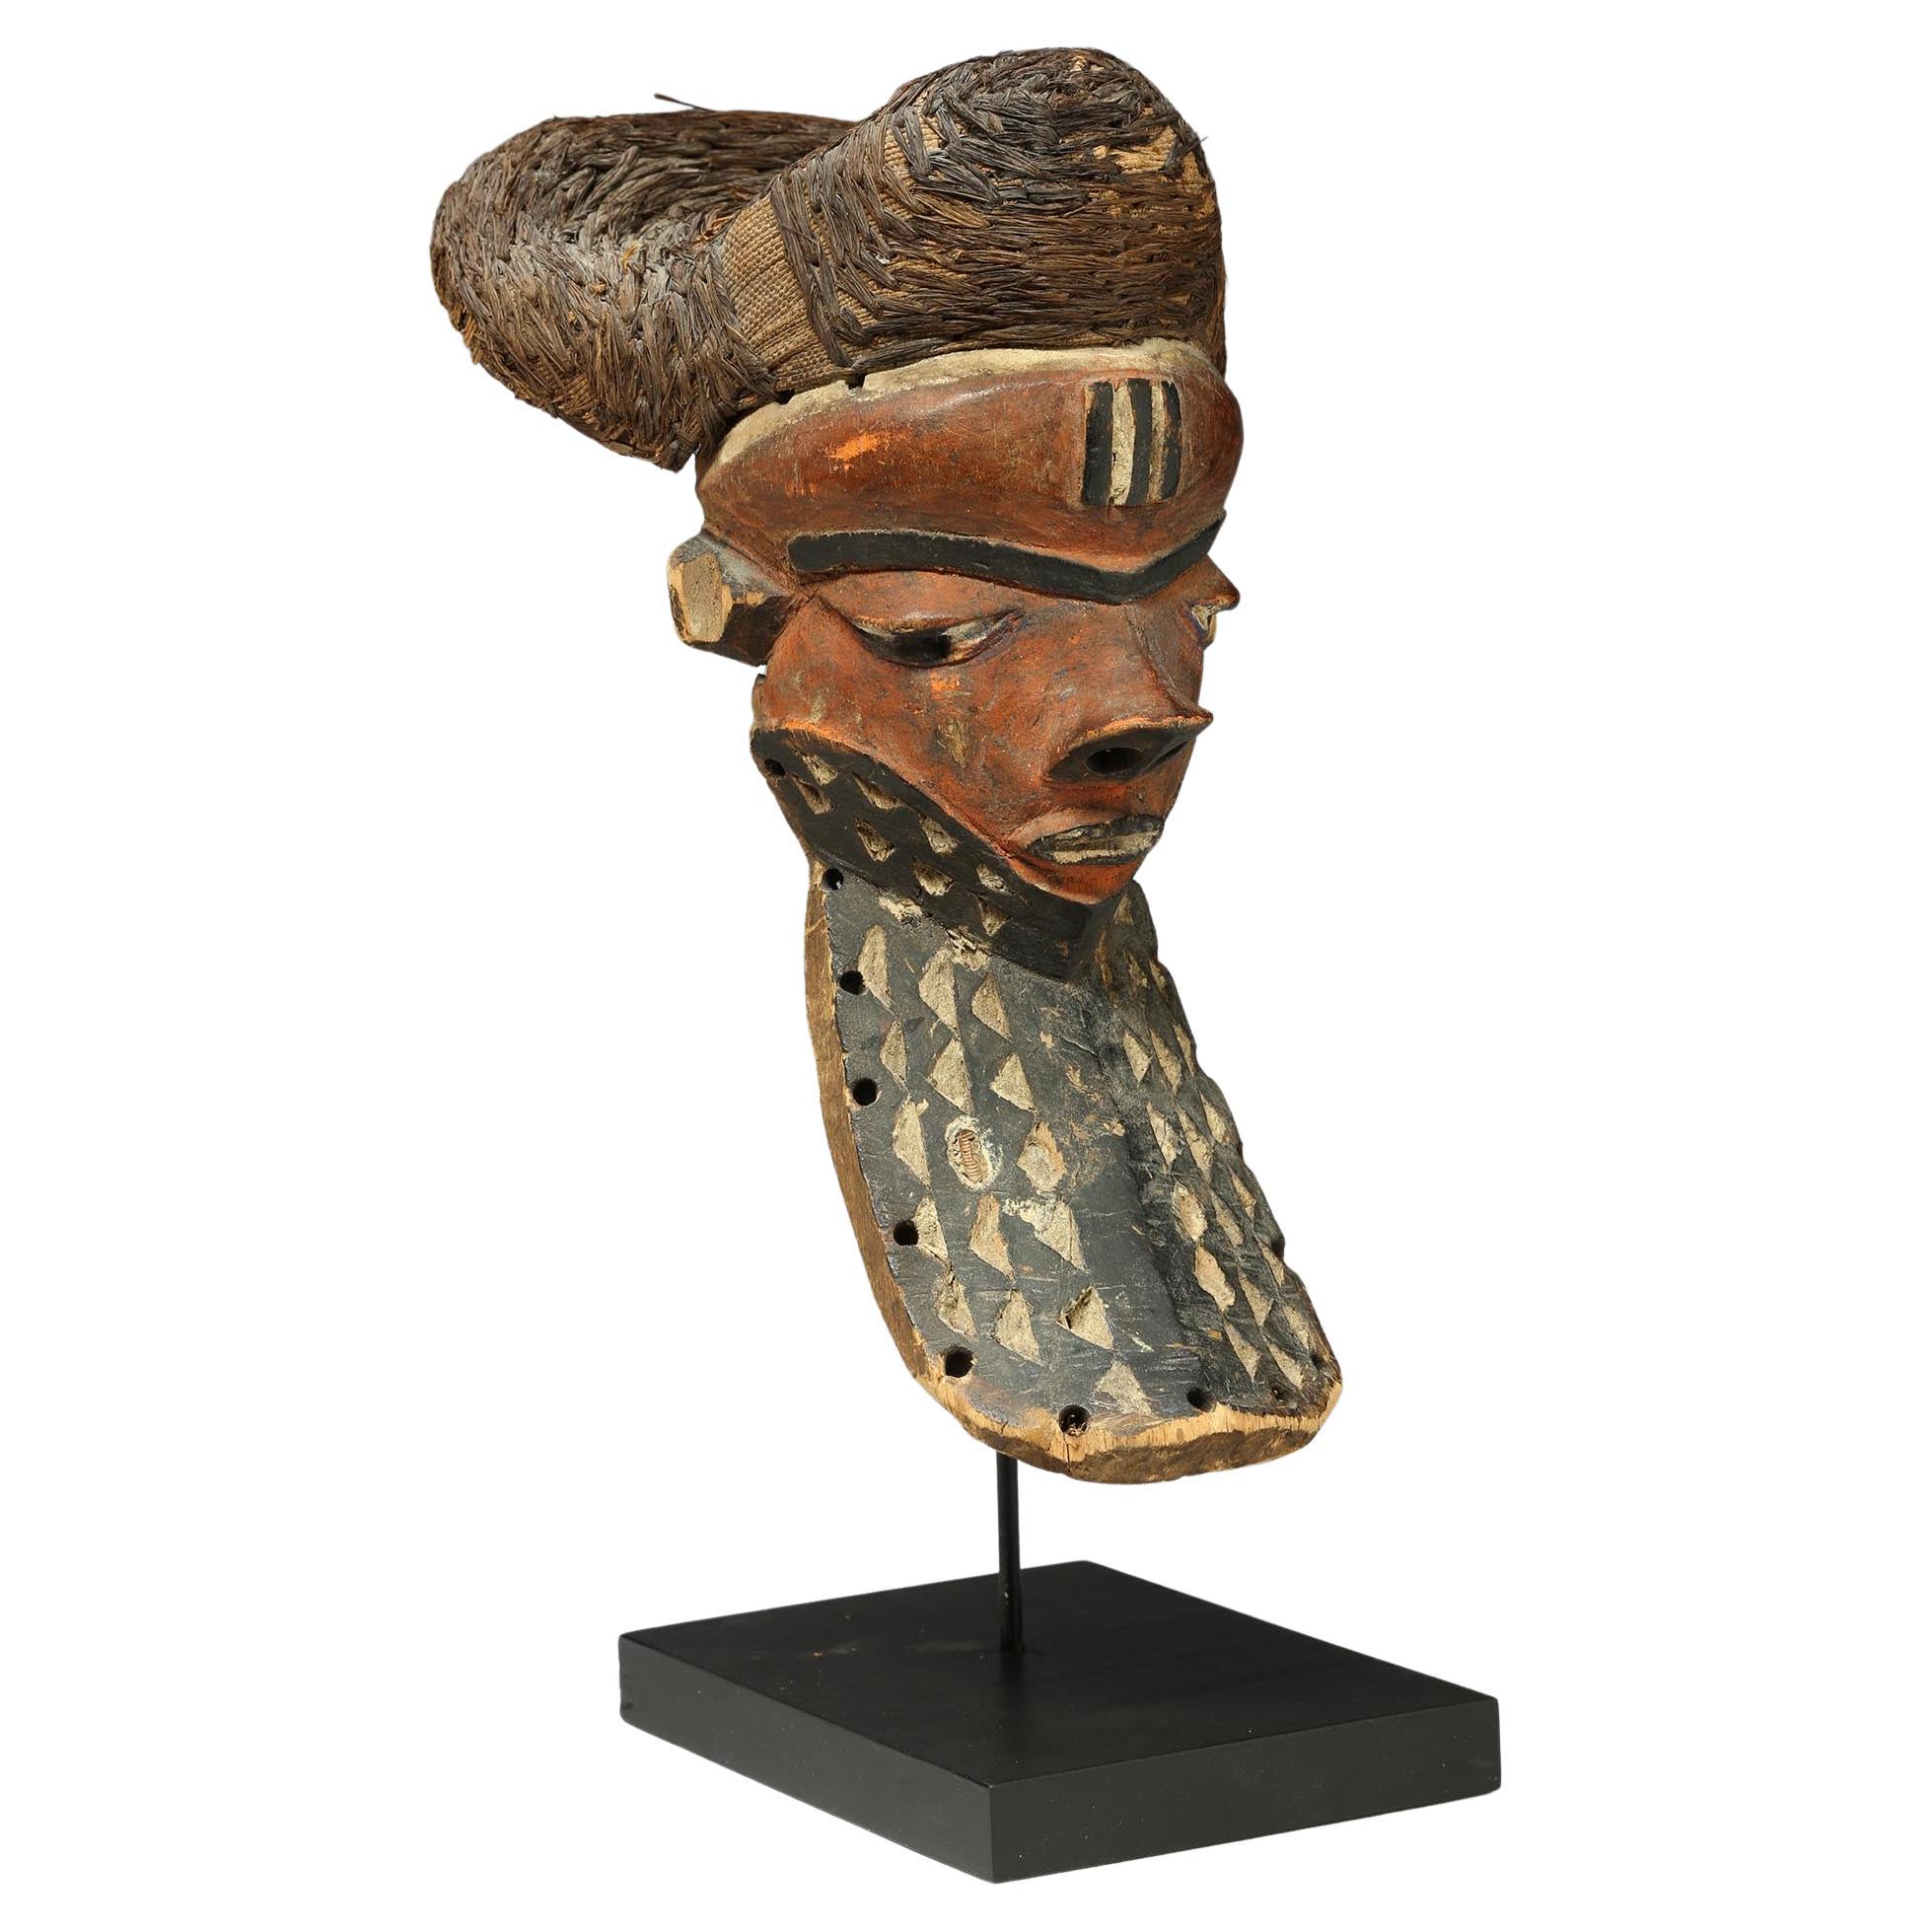 Old Pende giwoyo Red Mask with Beard and Woven Raffia Hair Cap Congo Africa For Sale